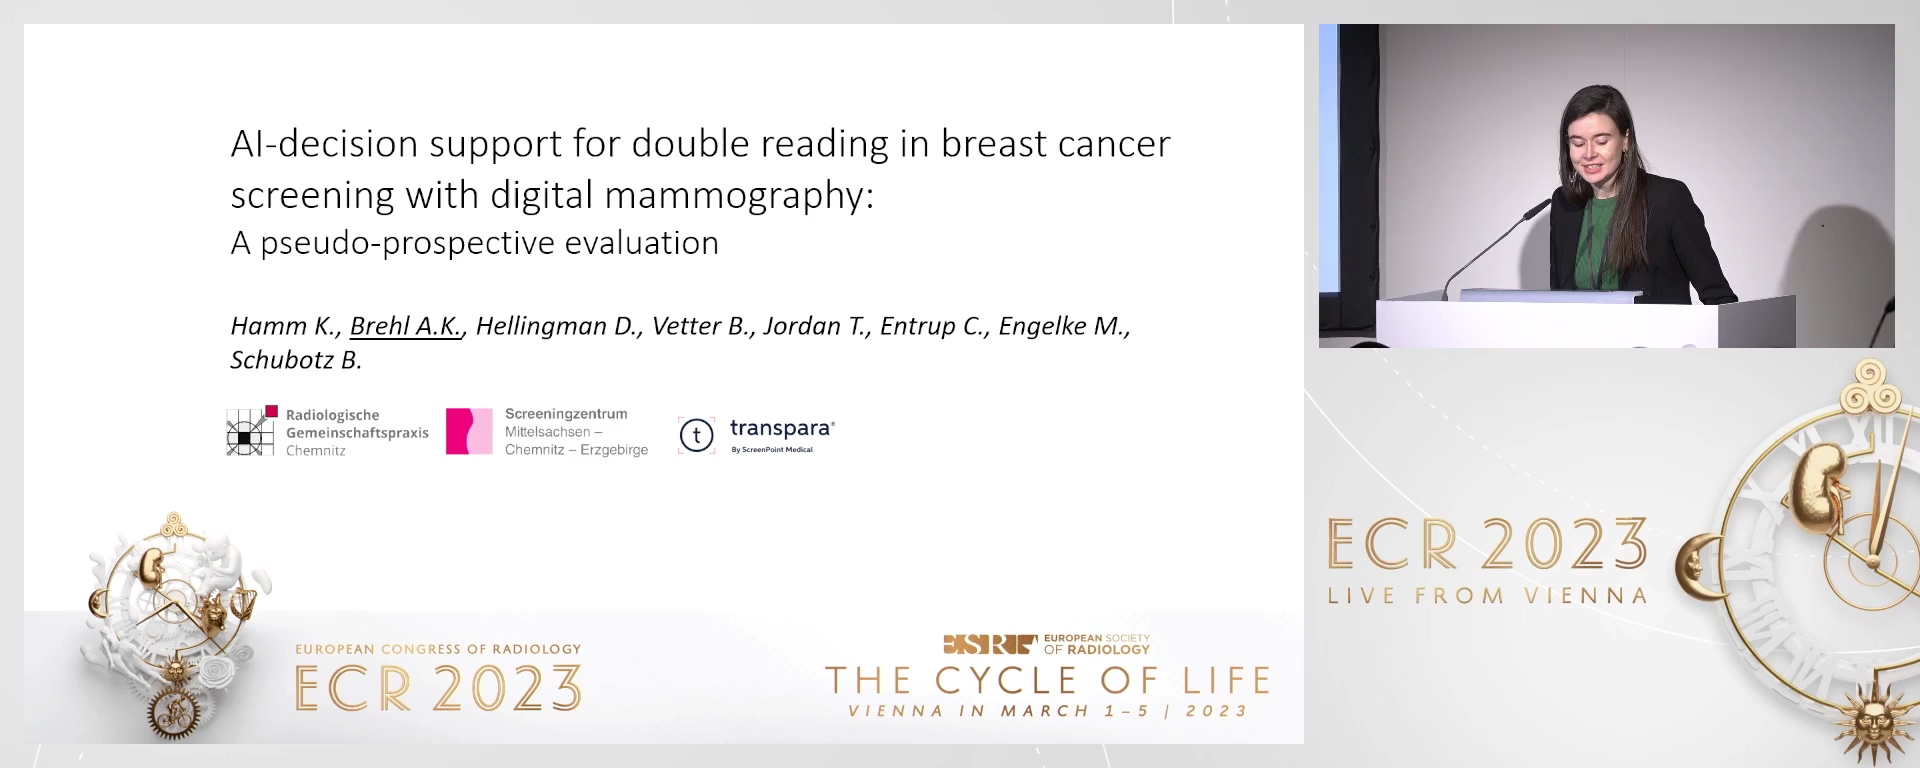 AI-decision support for double reading in breast cancer screening with digital mammography: a pseudo-prospective evaluation - Anne-Kathrin  Brehl, Nijmegen / NL